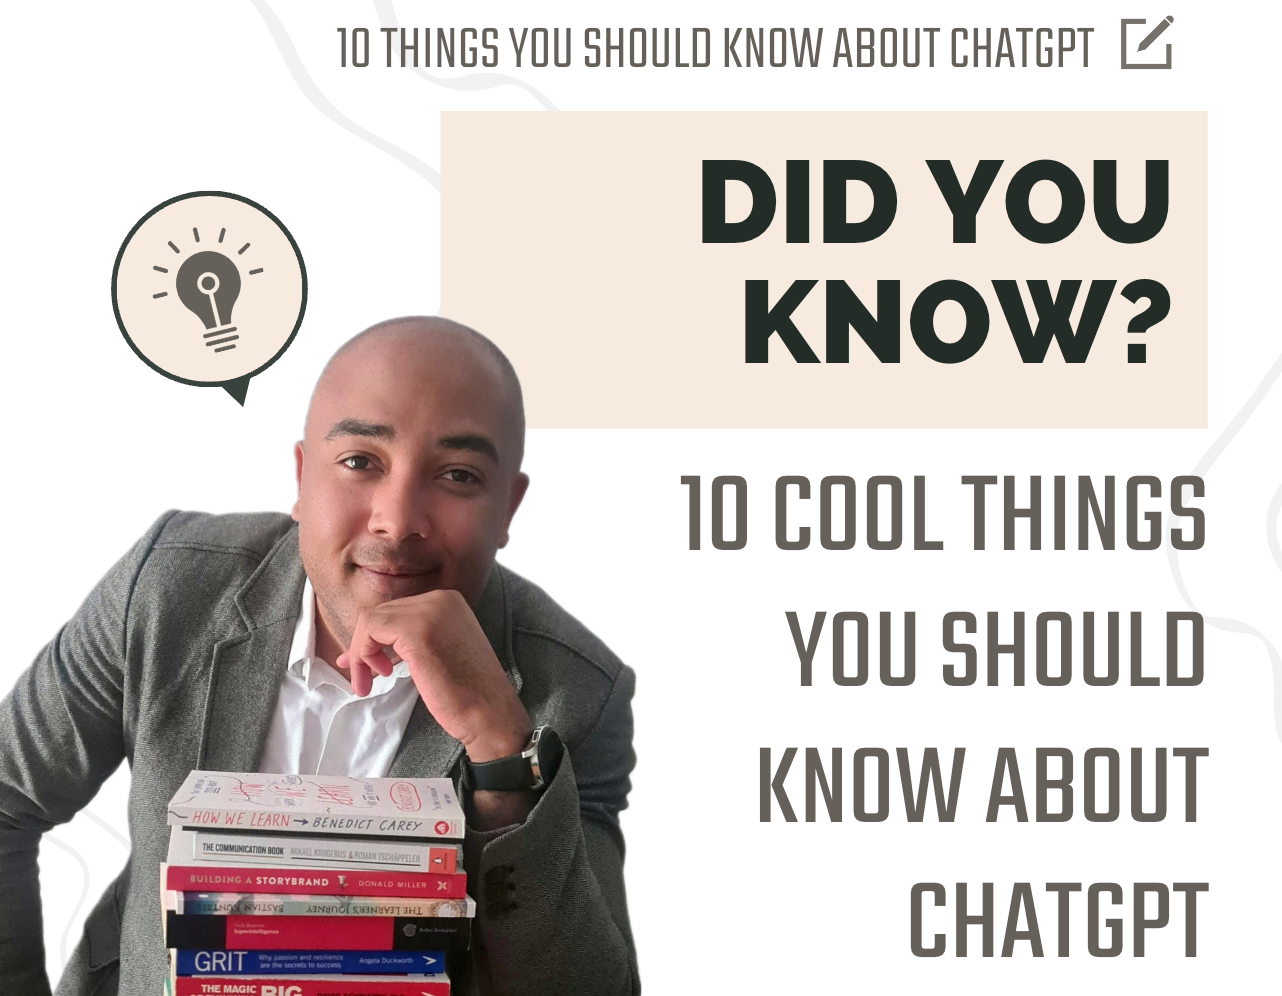 Cool Things to Try With ChatGPT - AiTuts